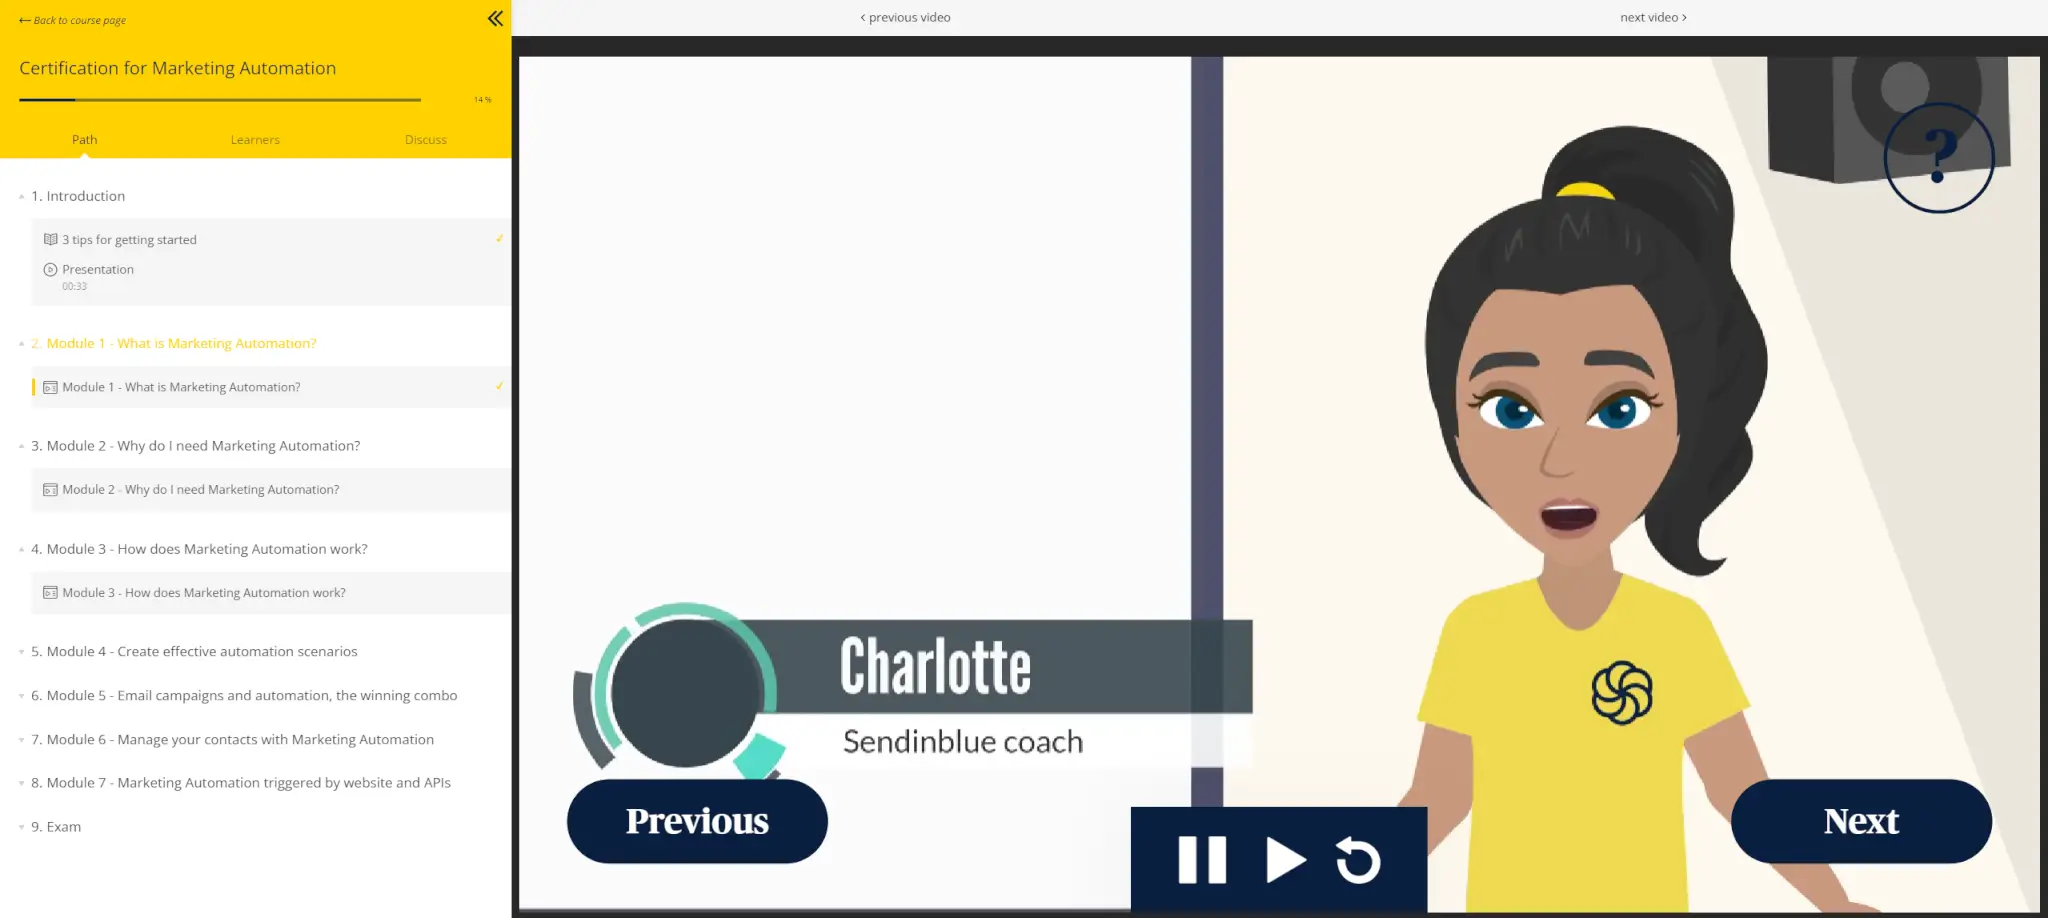 Sendinblue using LearnWorlds to deliver their SCORM courses. This is an example of a SCORM course showing an animated teacher with buttons to control the experience.